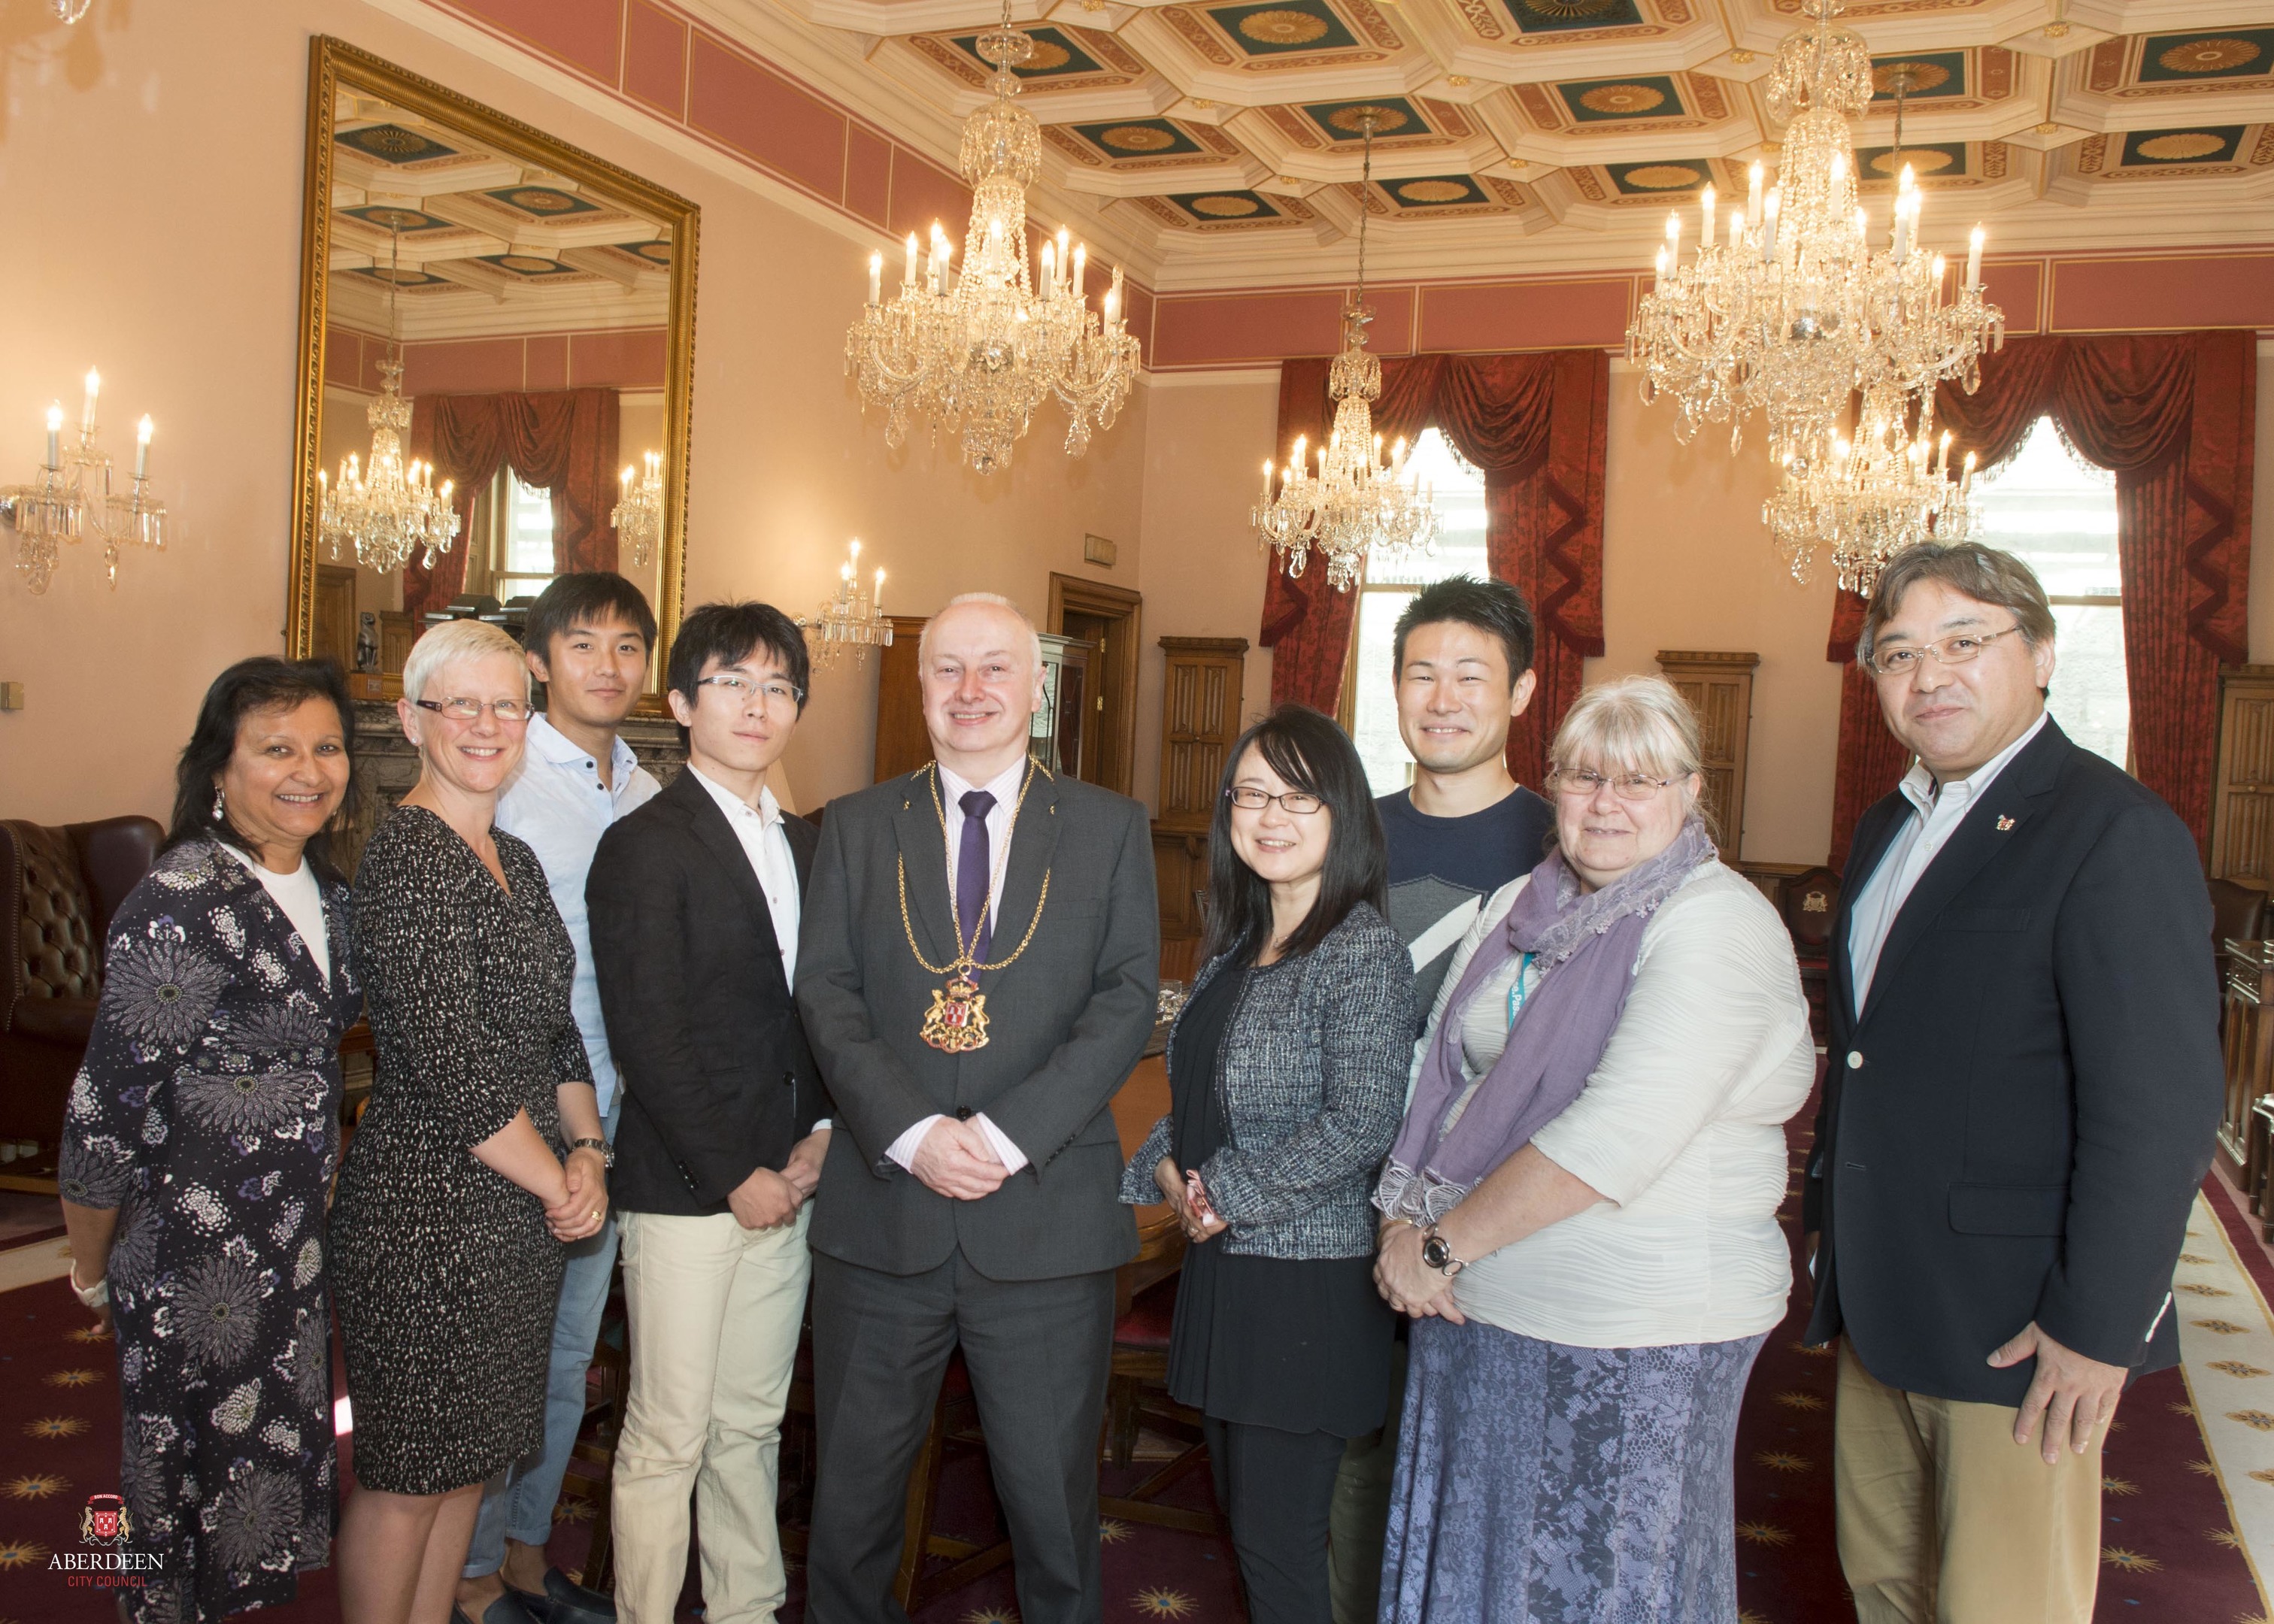 The Lord provost met a group of Japanese students and RGU Health care students